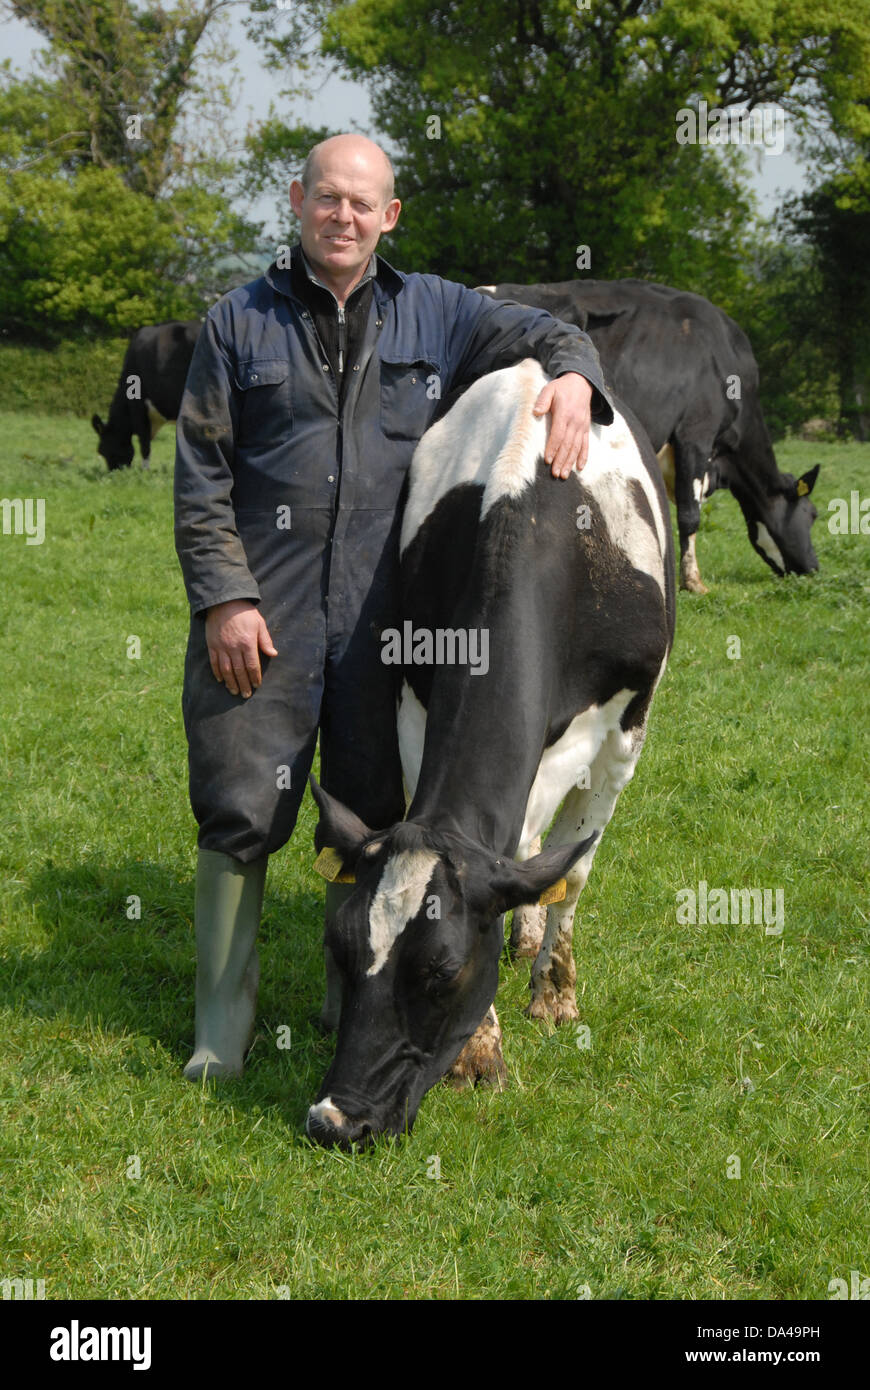 Dairy farmer Steve Hook with Friesian cows in herd on organic dairy farm featured in 'The Moo Man' documentary film Hook and Stock Photo